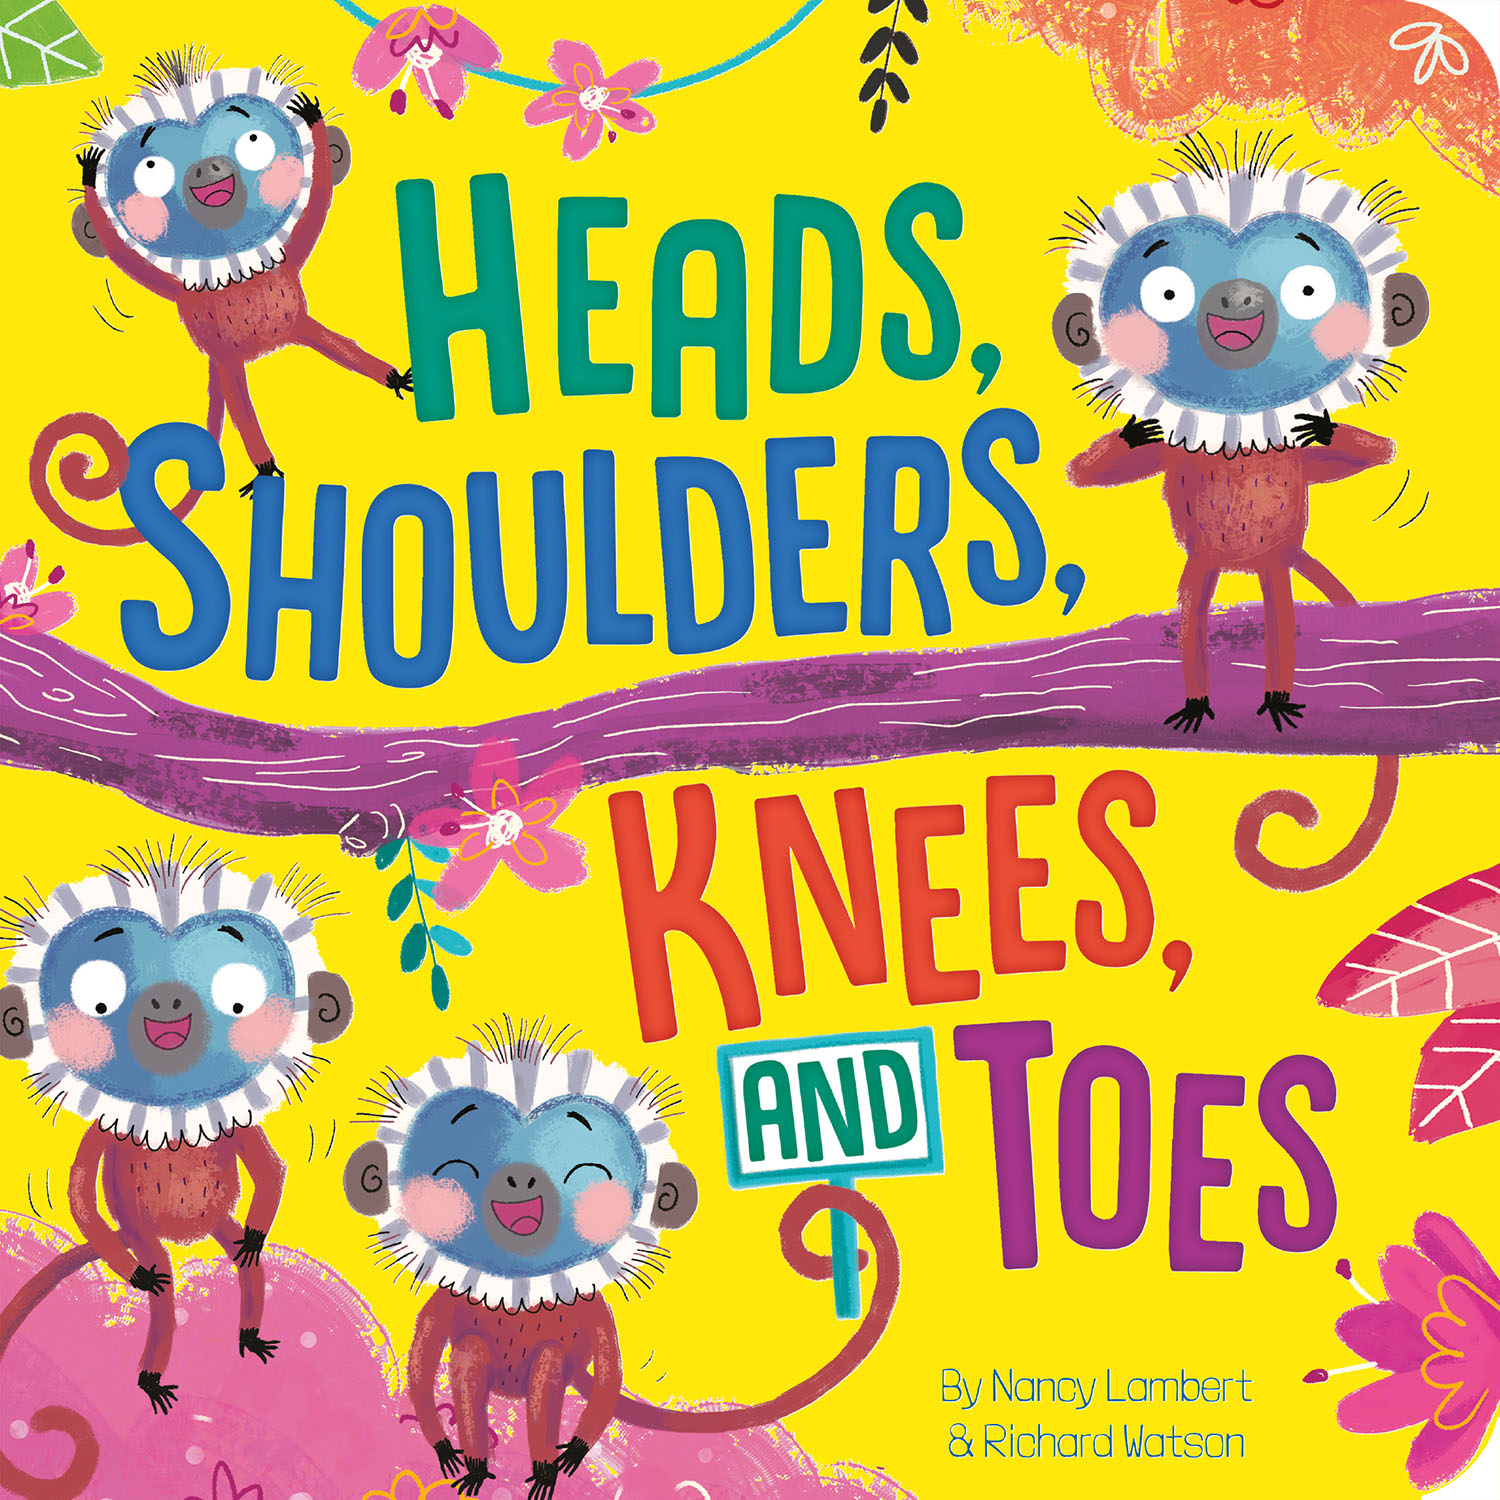 HEADS SHOULDERS KNEES AND TOES 